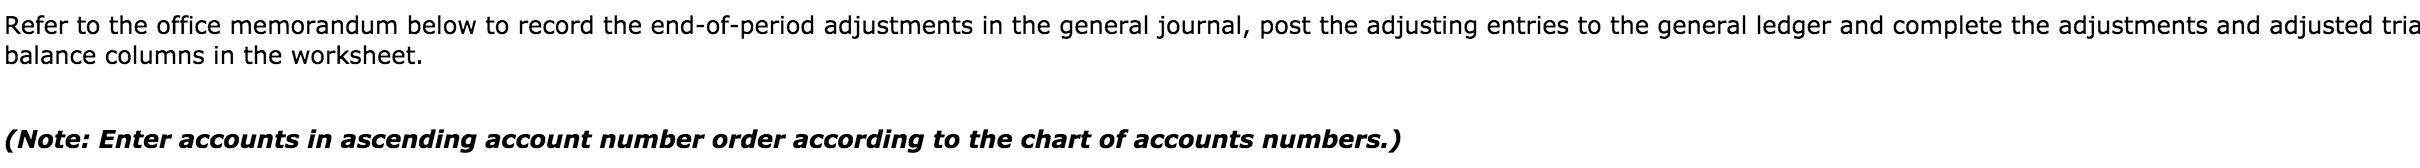 Refer to the office memorandum below to record the end-of-period adjustments in the general journal, post the adjusting entri